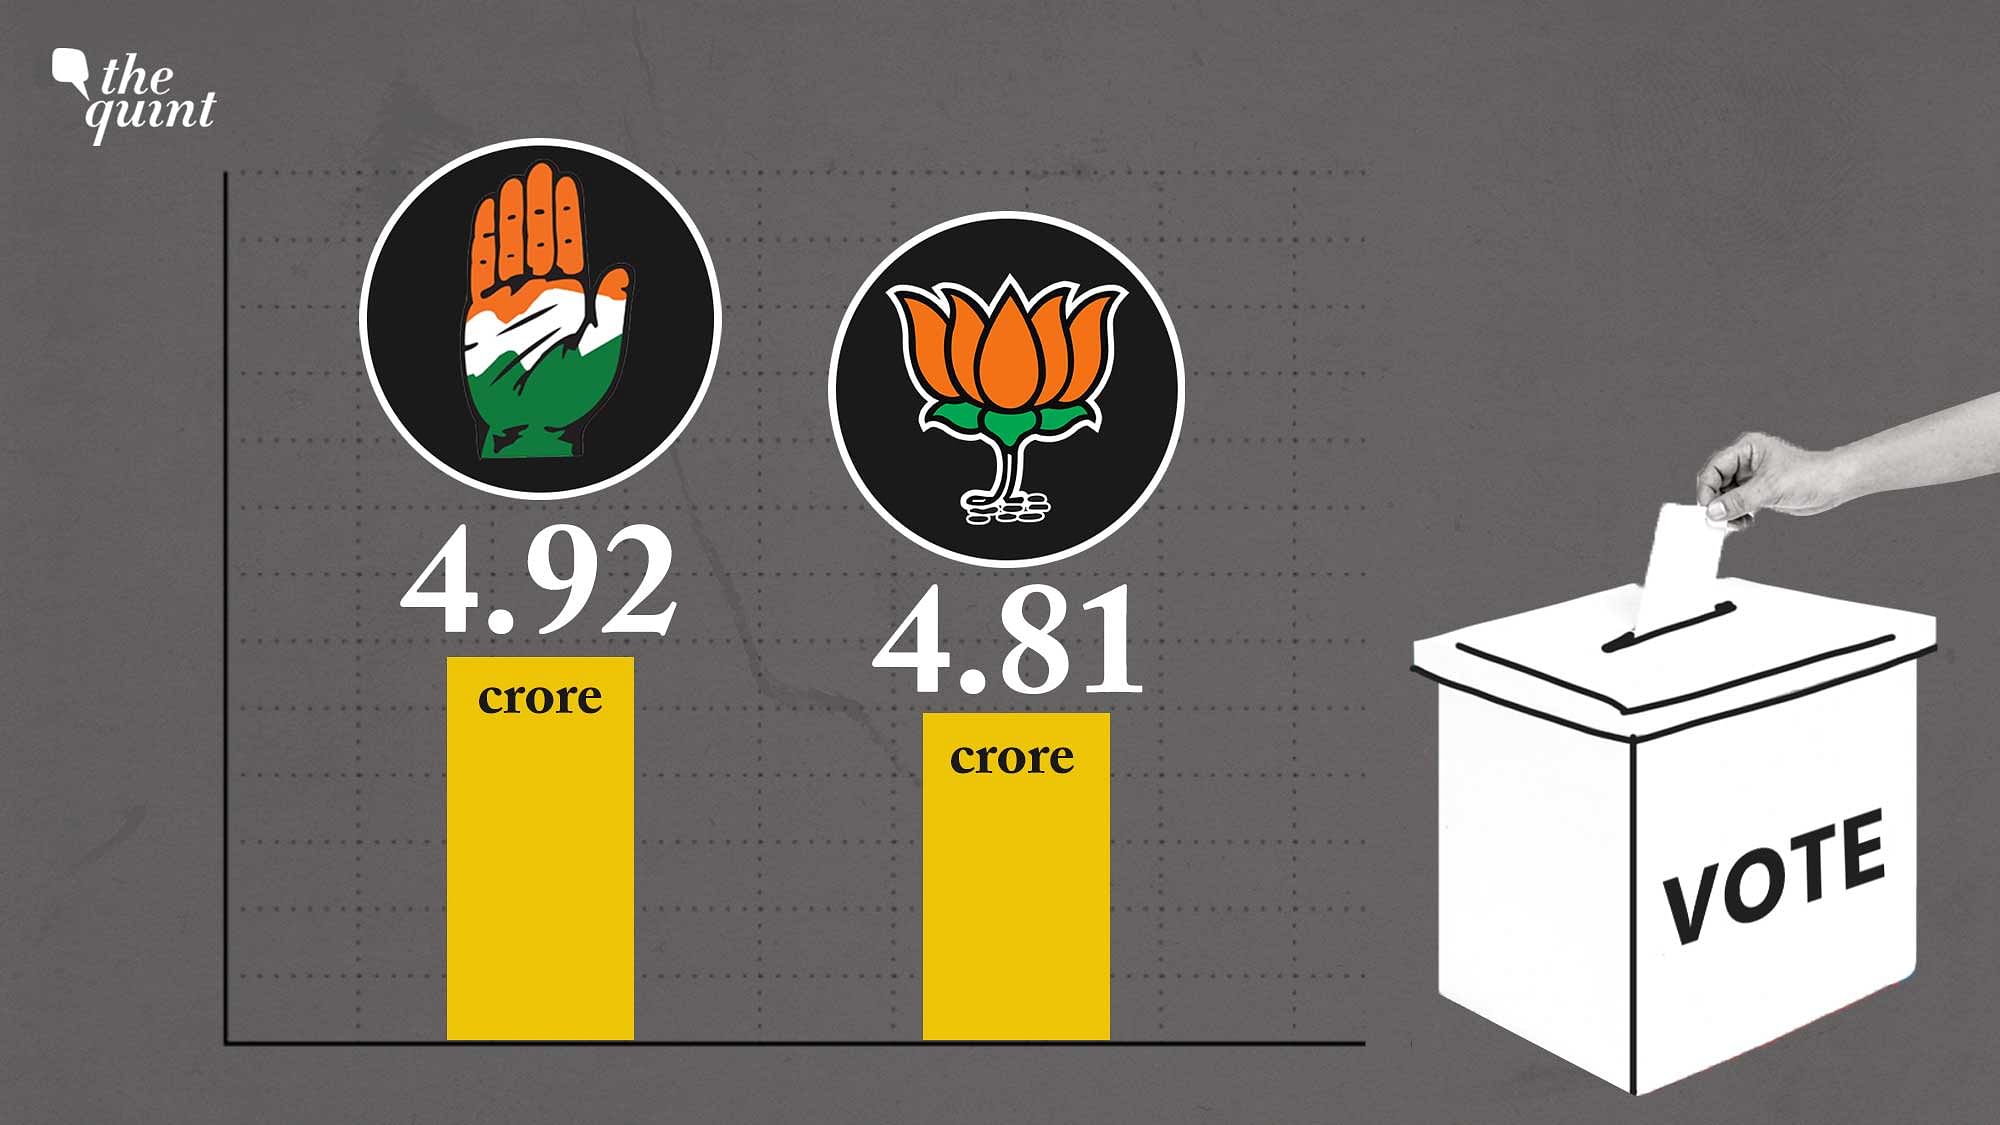 <div class="paragraphs"><p>(Congress polled 11 lakh more votes than the BJP in the recent elections)</p></div>